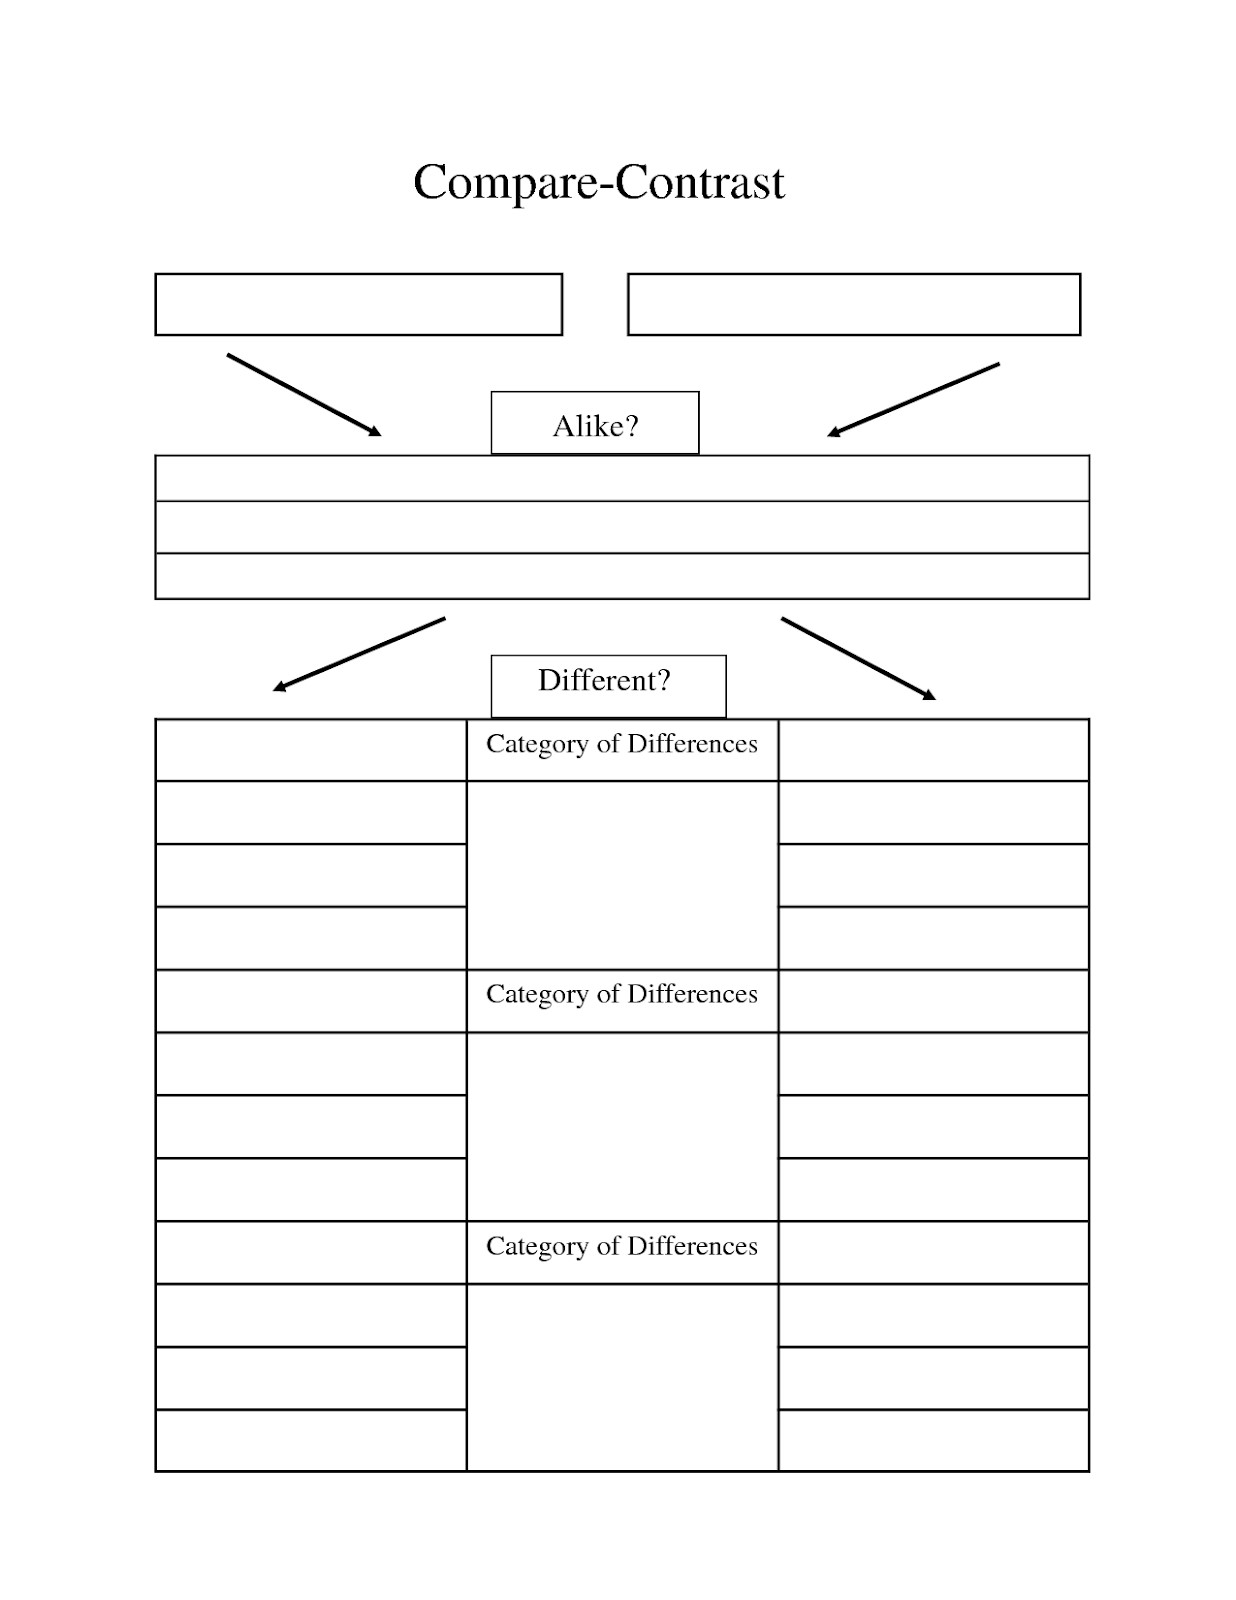 Complete Guide to Write a Compare and Contrast Essay Outline